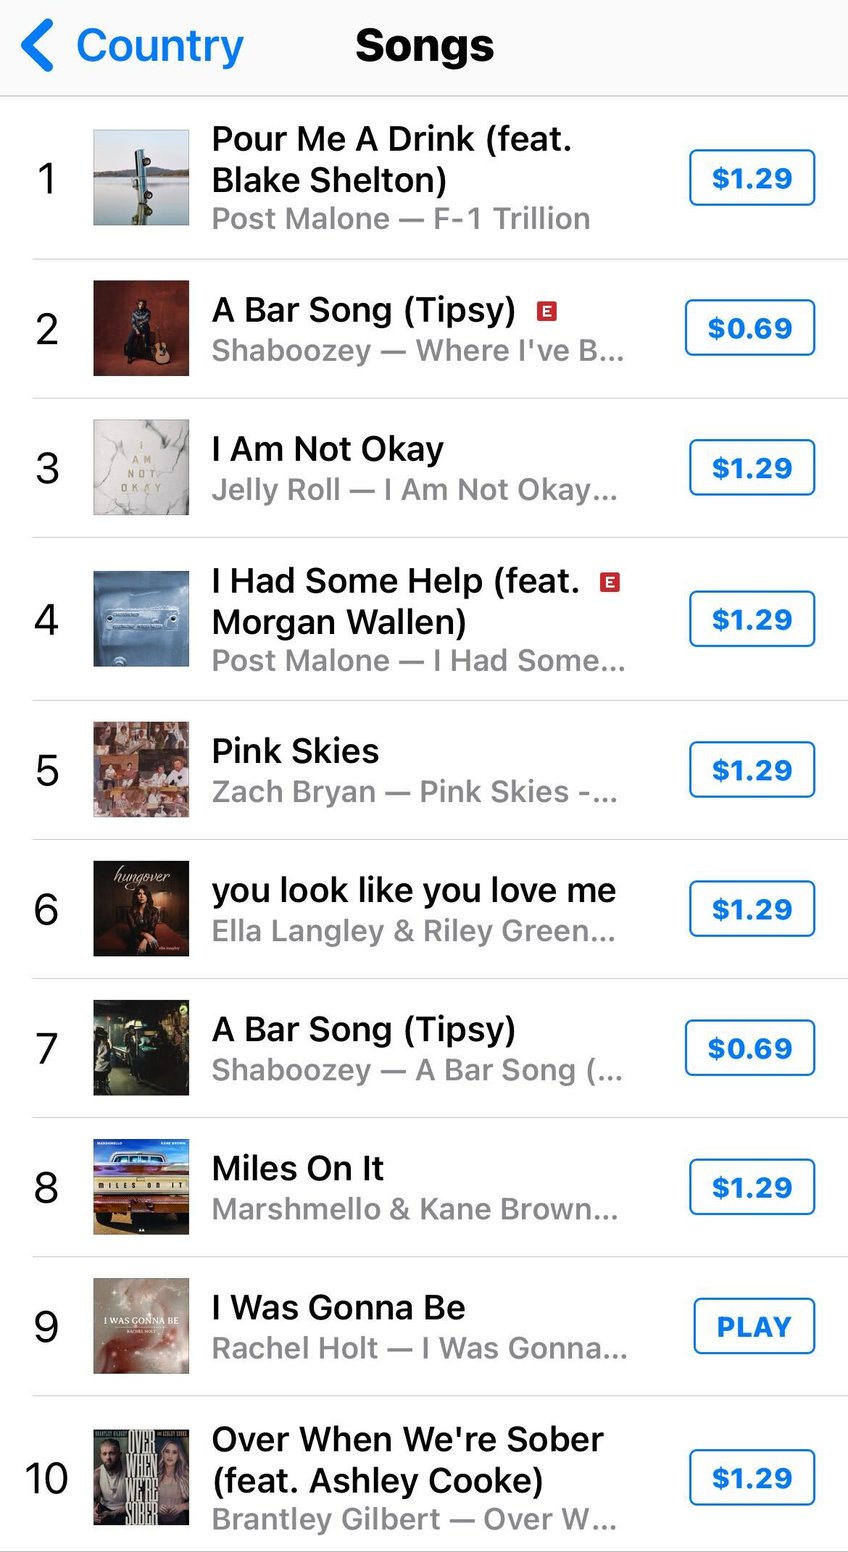 teenager rachel holts pro life anthem rockets into top 10 on itunes country charts